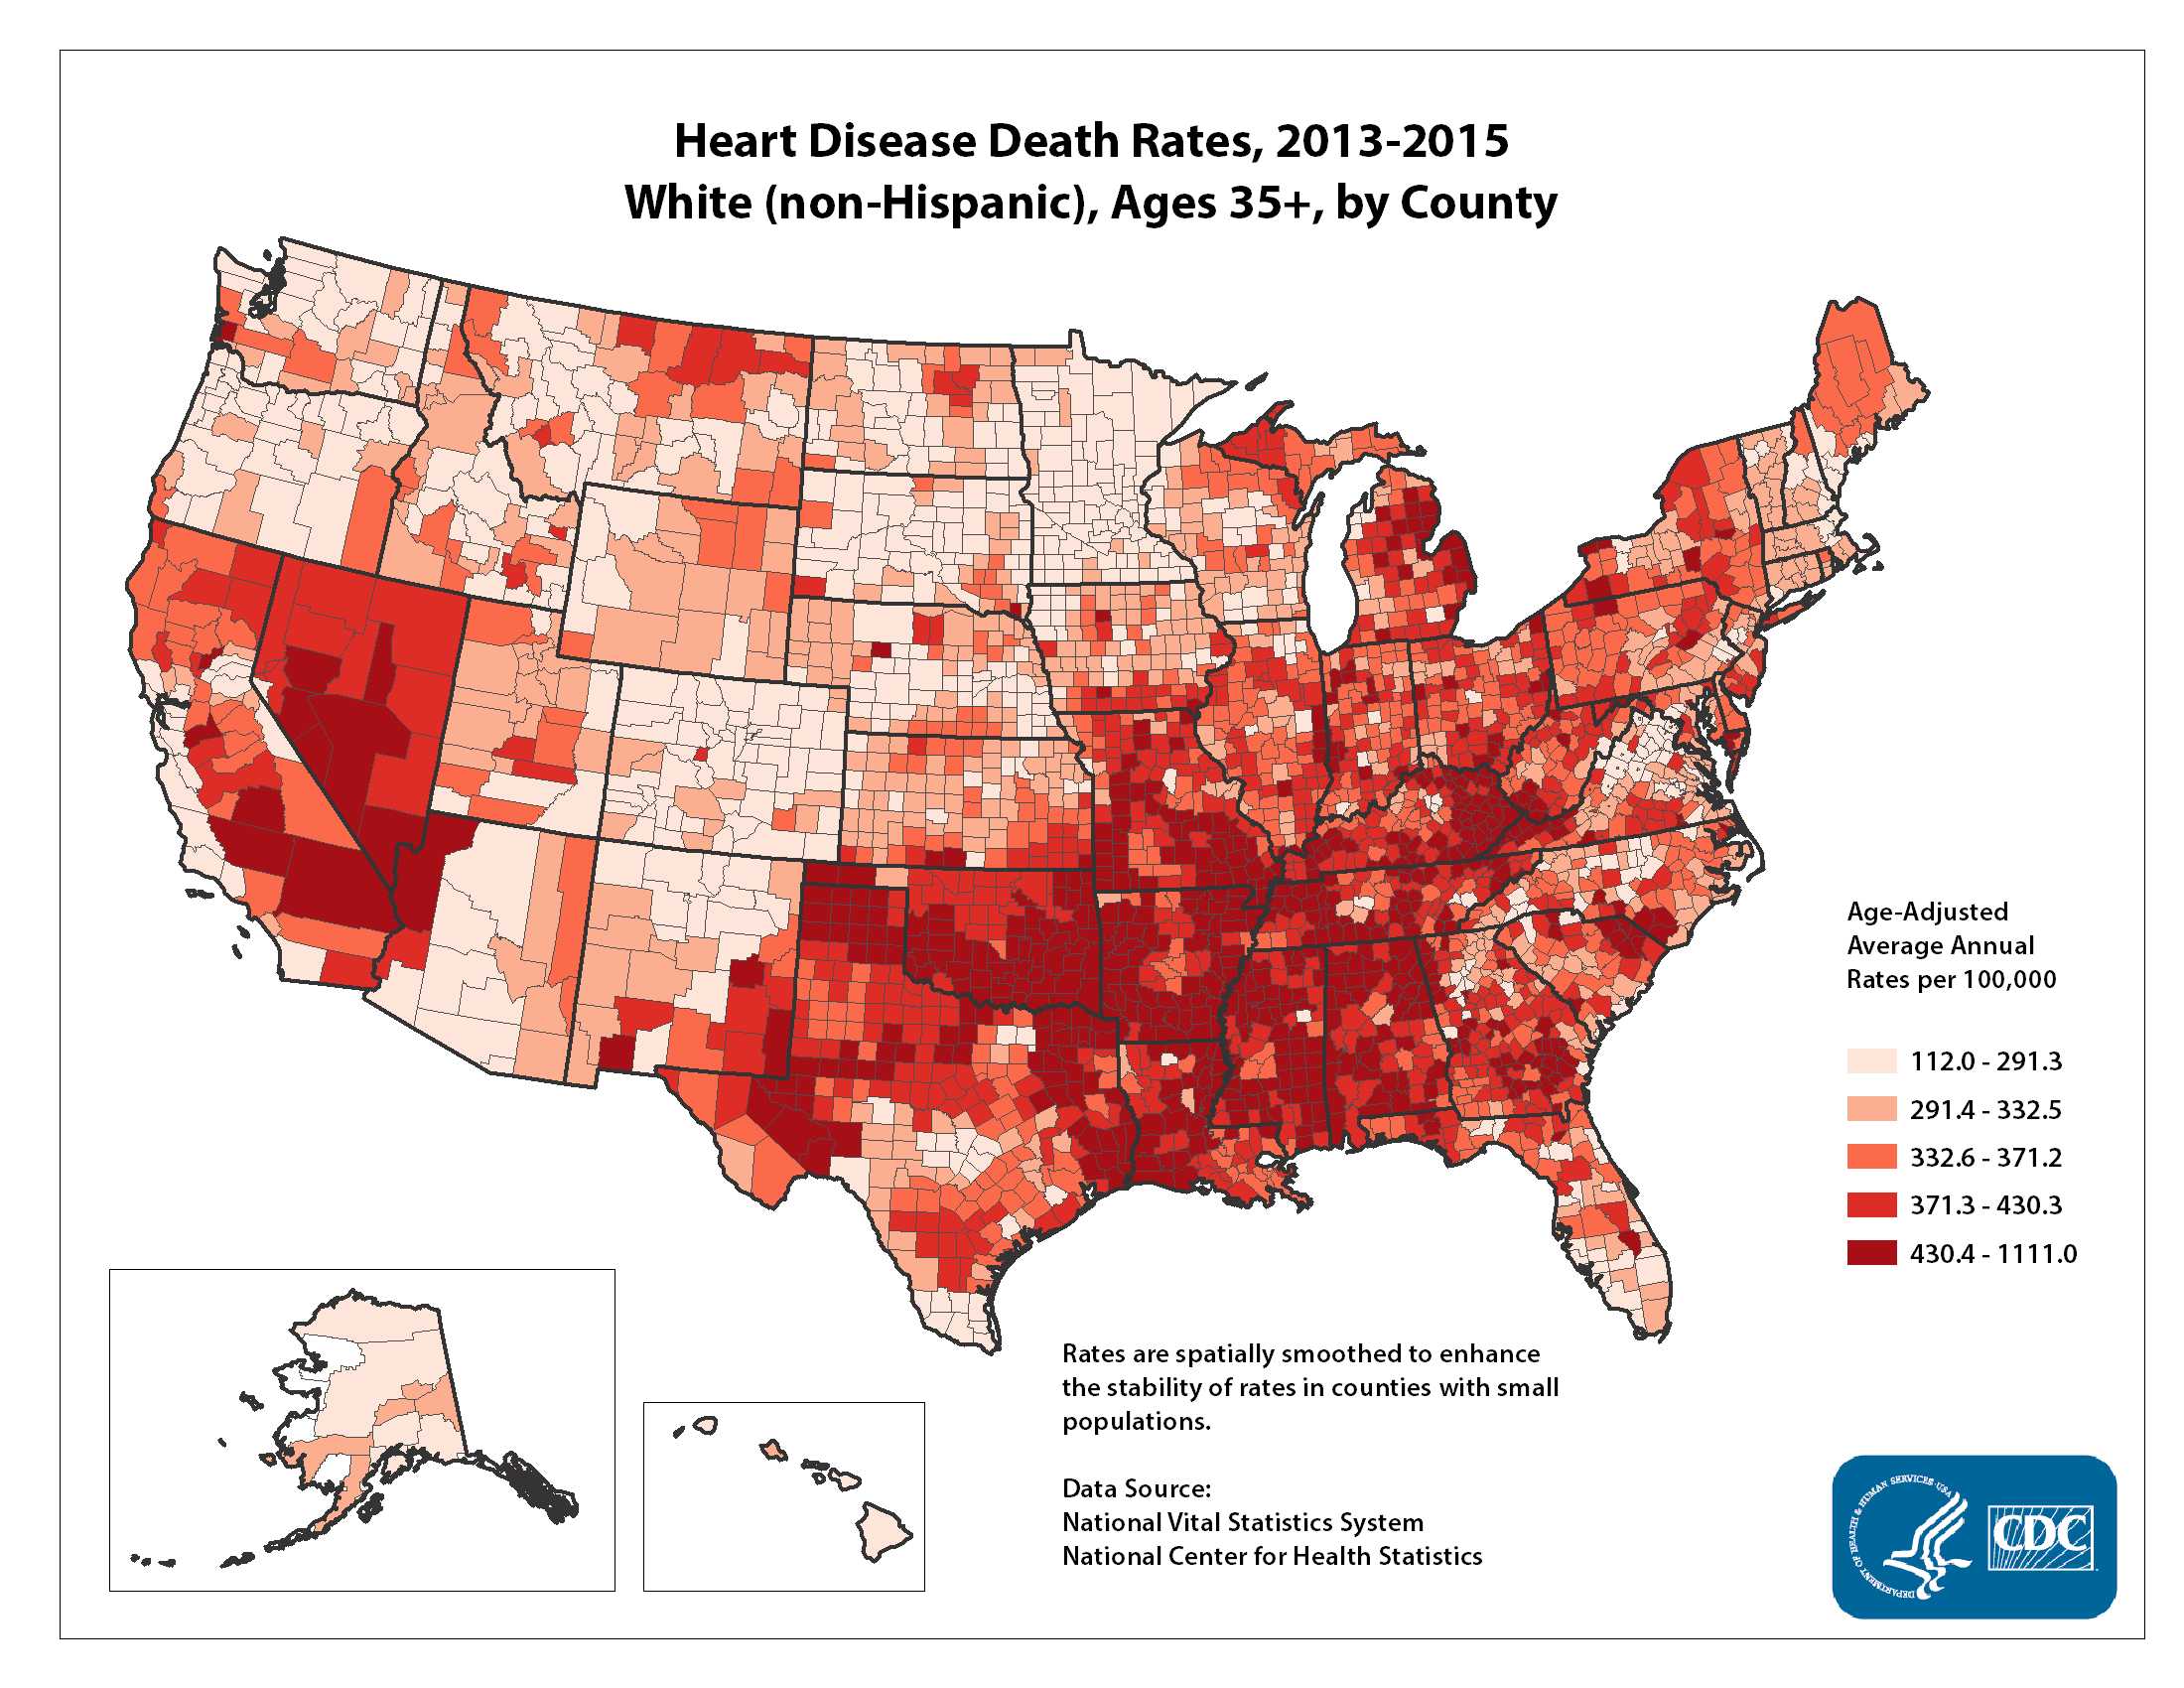 Heart Disease Death Rates for 2012 through 2014 for Whites Aged 35 Years and Older by County. The map shows that concentrations of counties with the highest heart disease death rates - meaning the top quintile - are located primarily in Alabama, Mississippi, Louisiana, Arkansas, Oklahoma, Kentucky, and Tennessee.  Pockets of high-rate counties also were found in Georgia, South Carolina, Missouri, California, Nevada, Texas, and New Mexico.